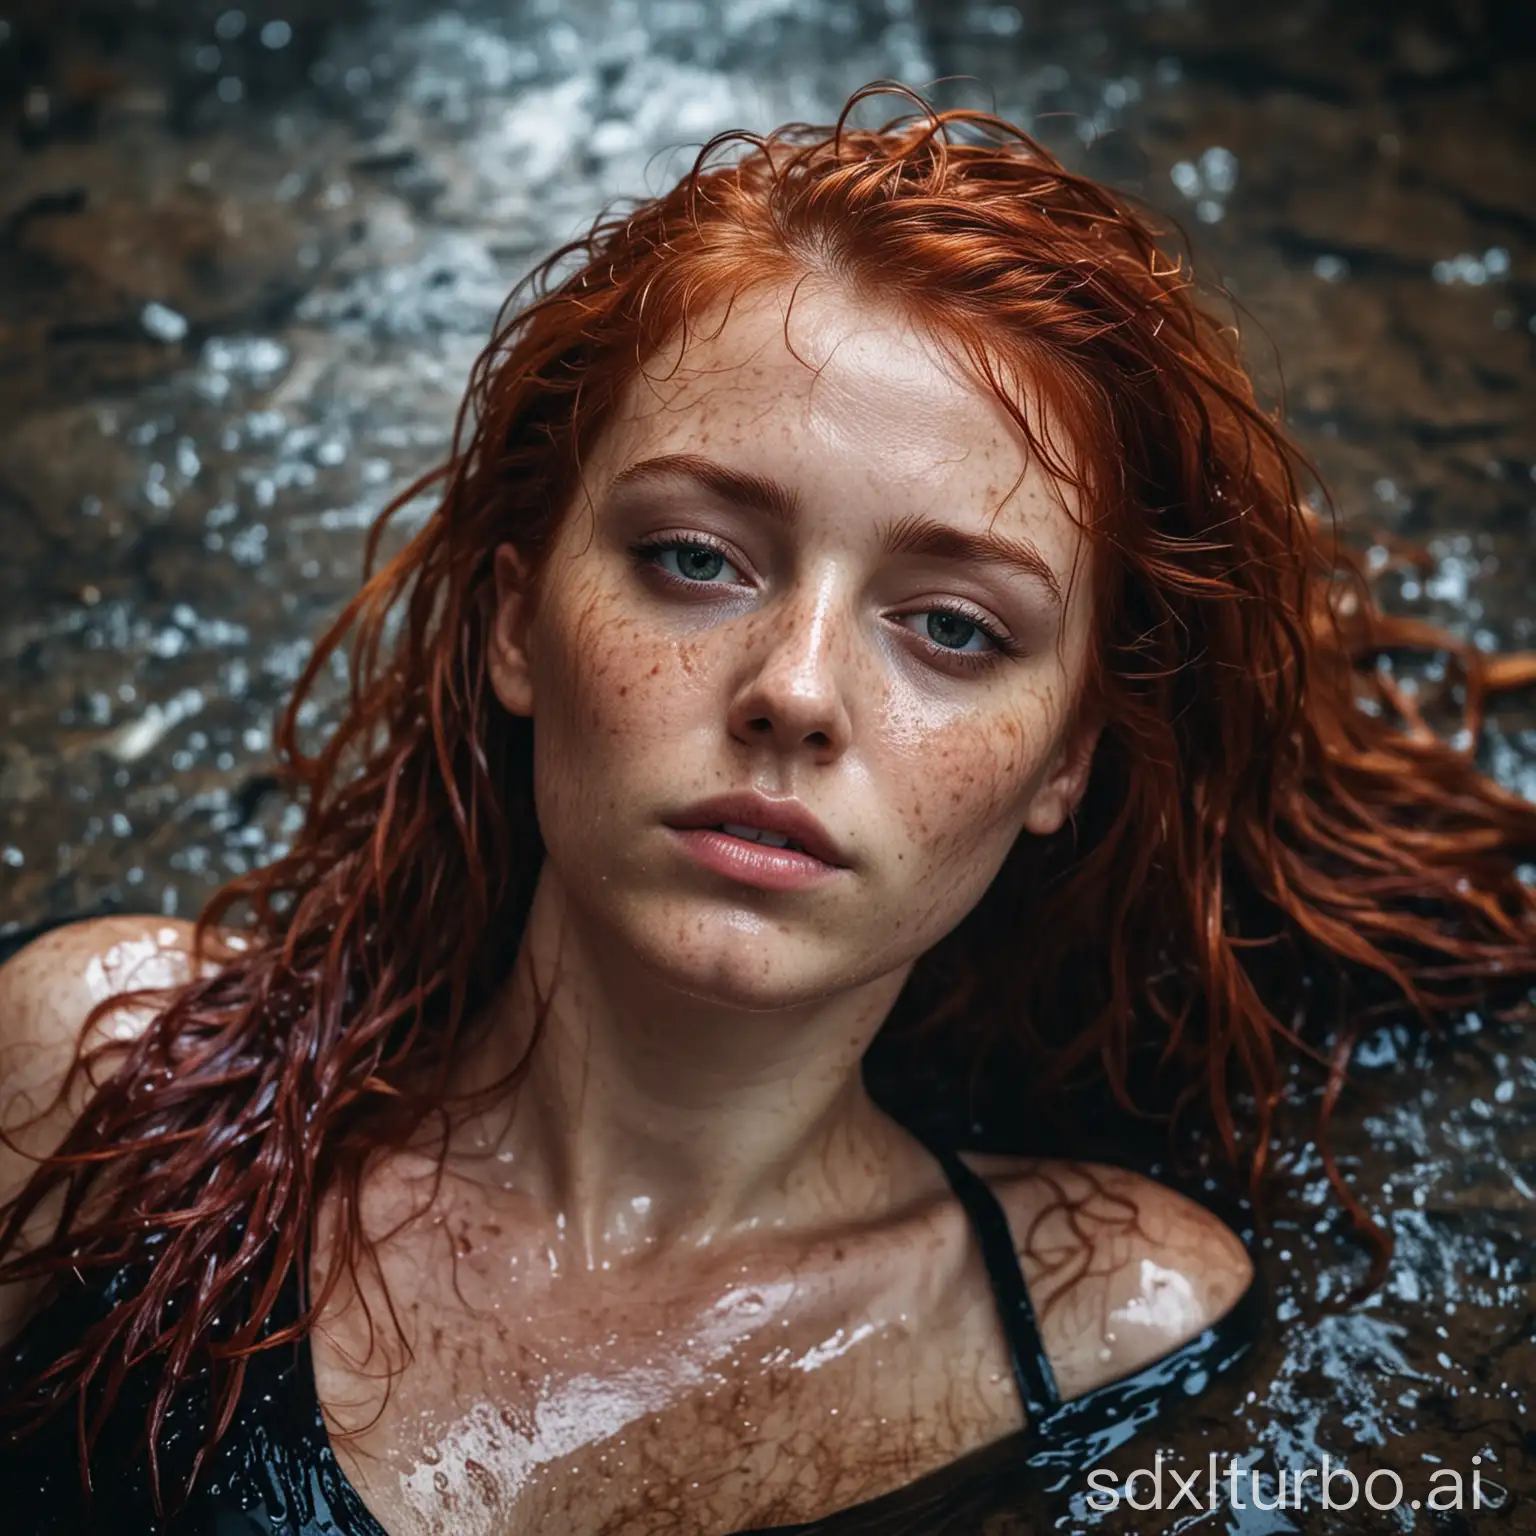 photo portait young female deep gaze wet red hair lying with her body wet in a disused floor, cinematic light scene